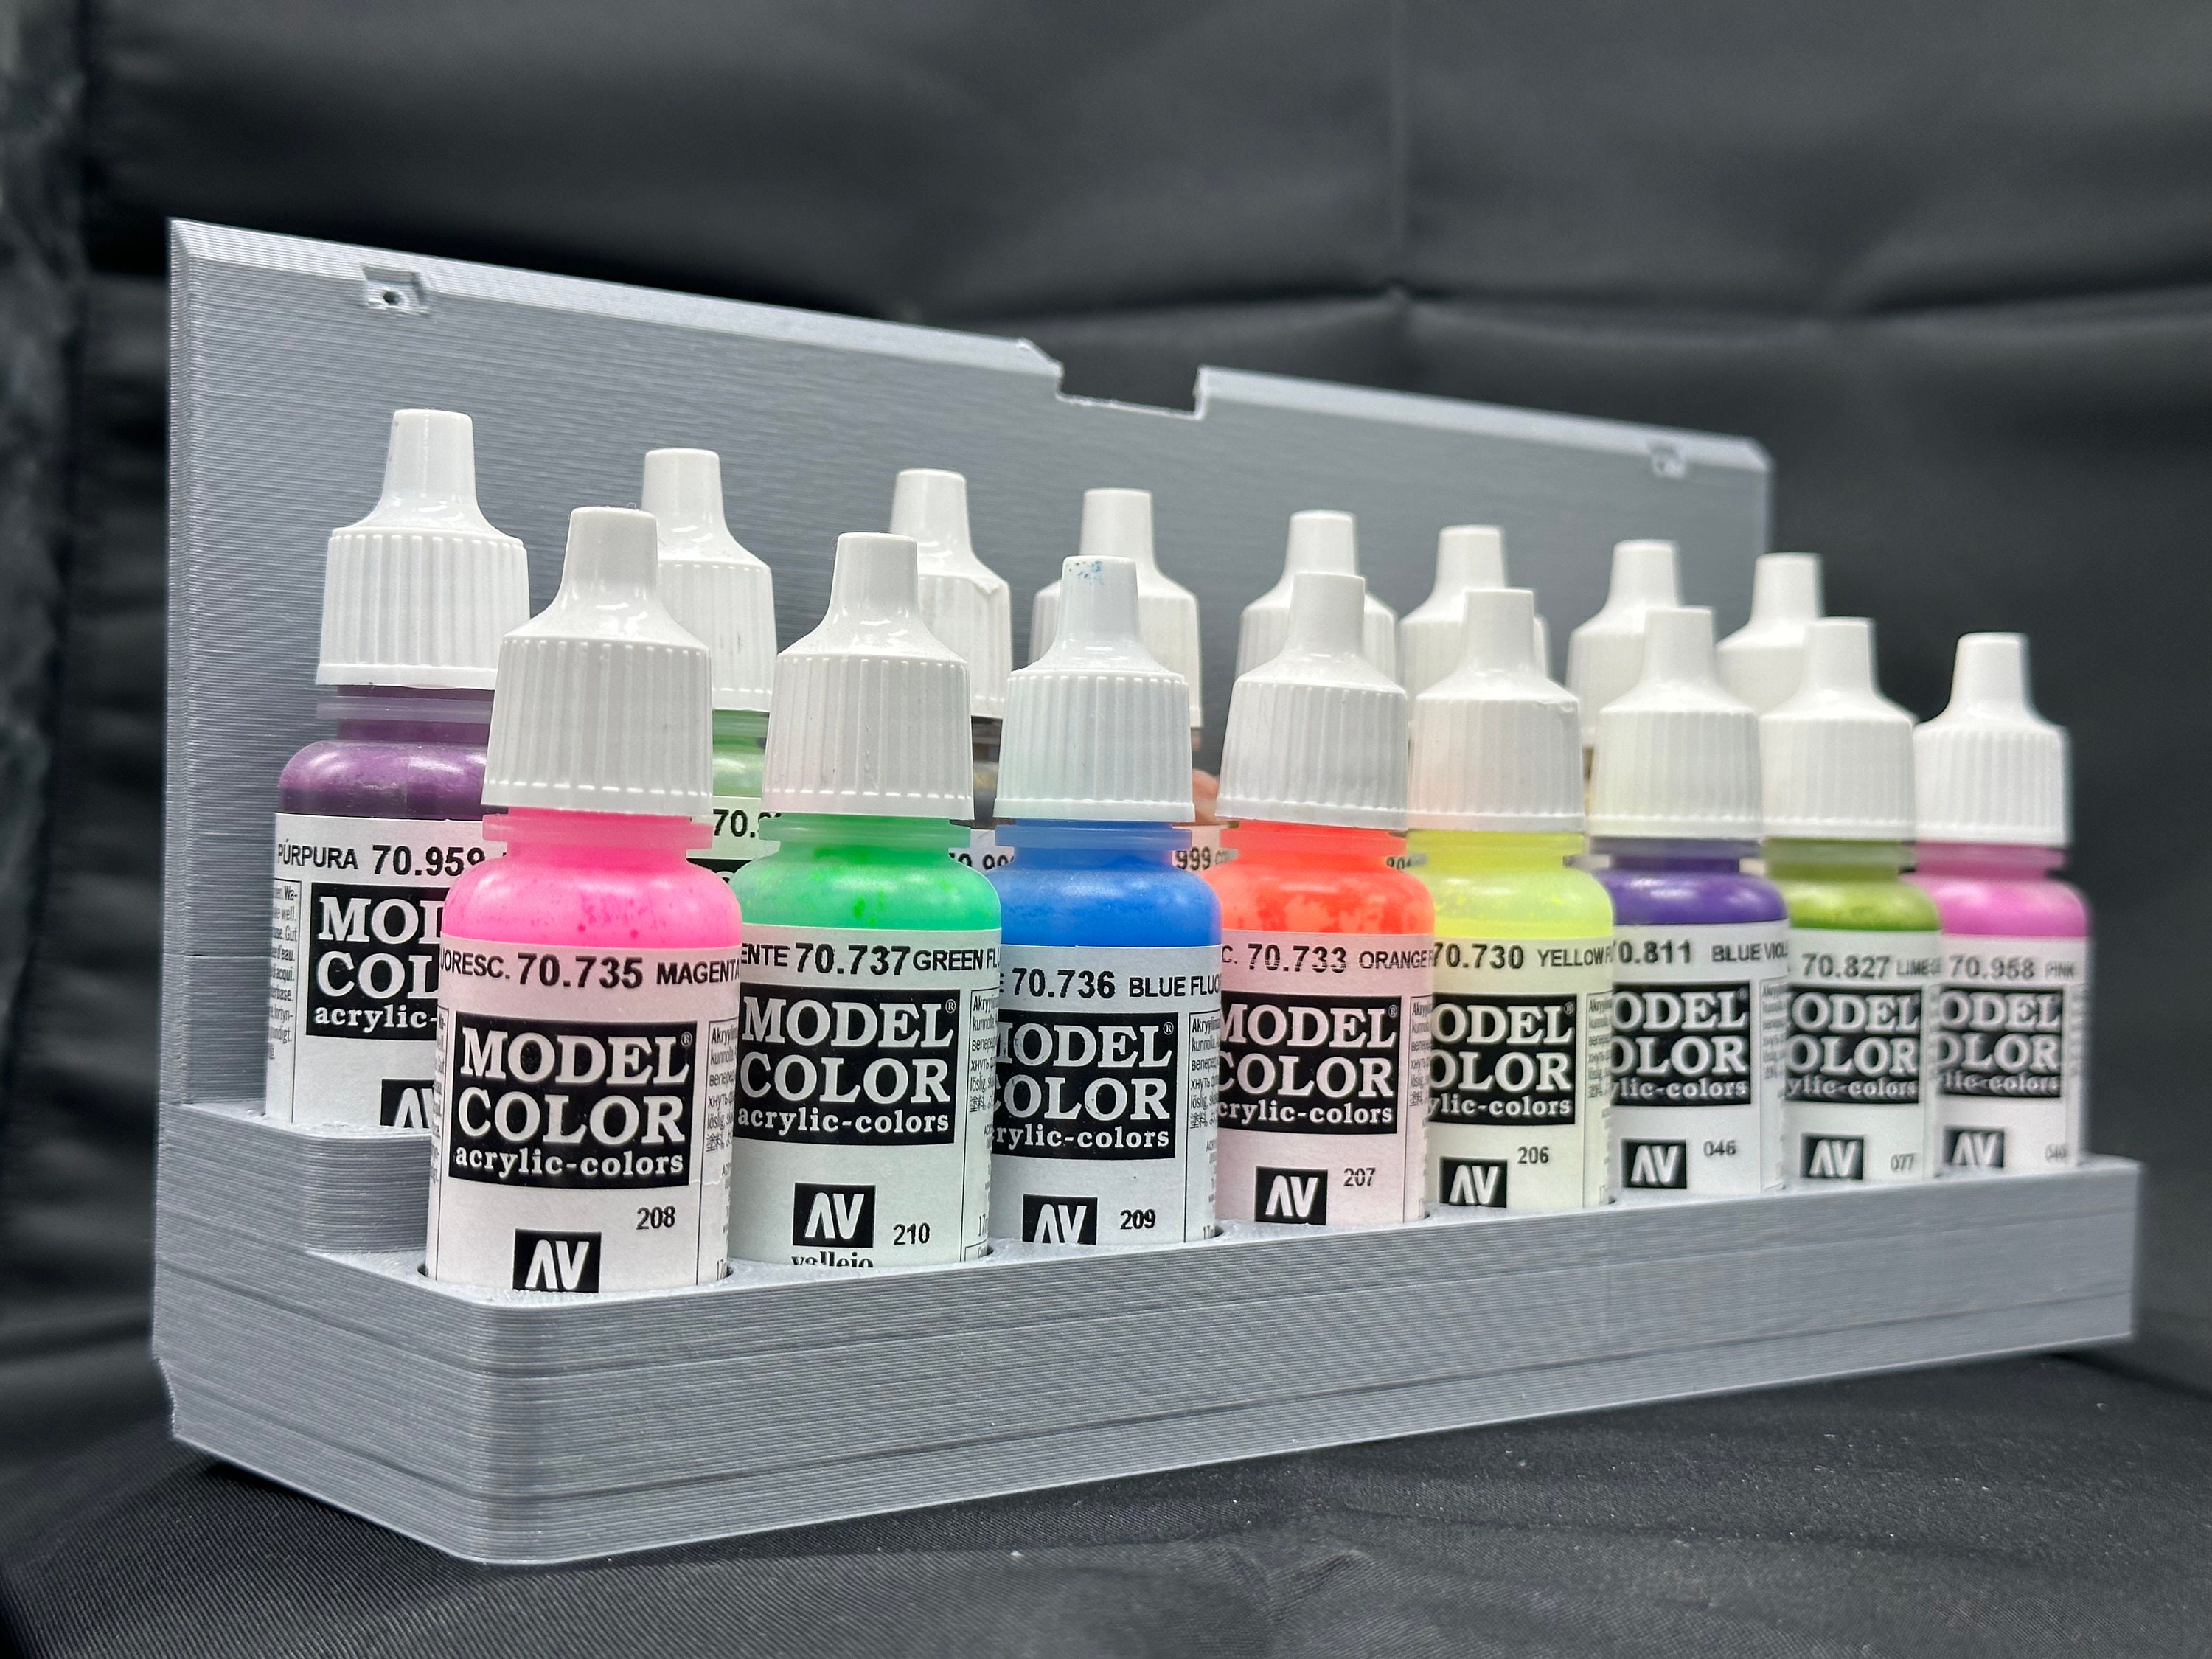 17ml Bottle Leather & Metal Game Color Paint Set (16 Colors) - On